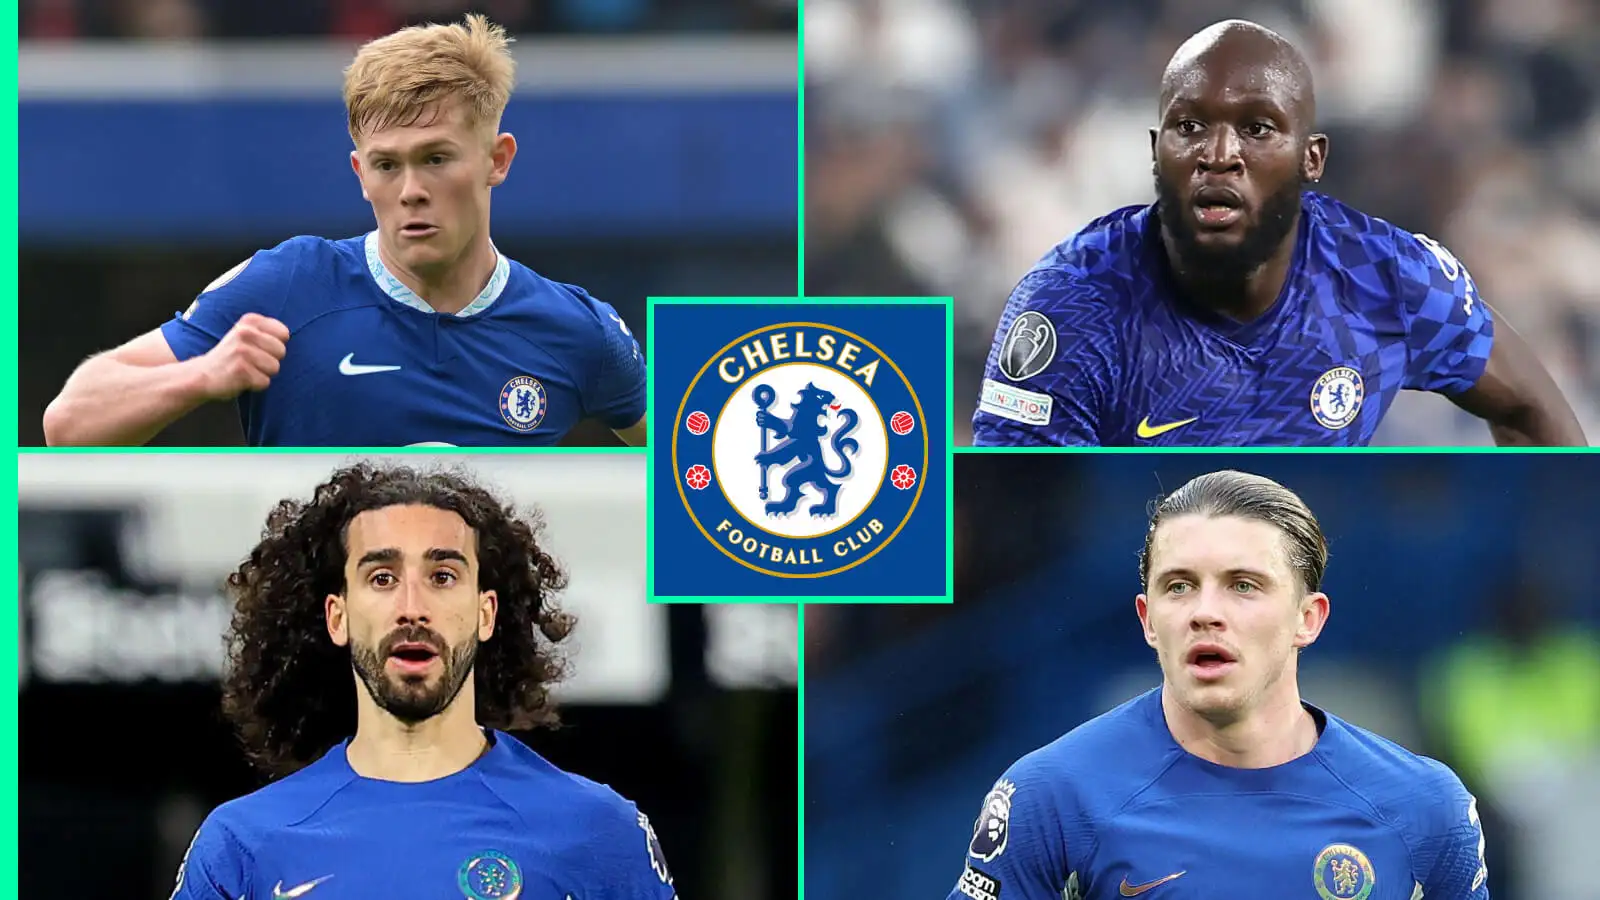 Seven-man Chelsea exodus to begin with £28m sale; record signing and Brighton flop also leaving